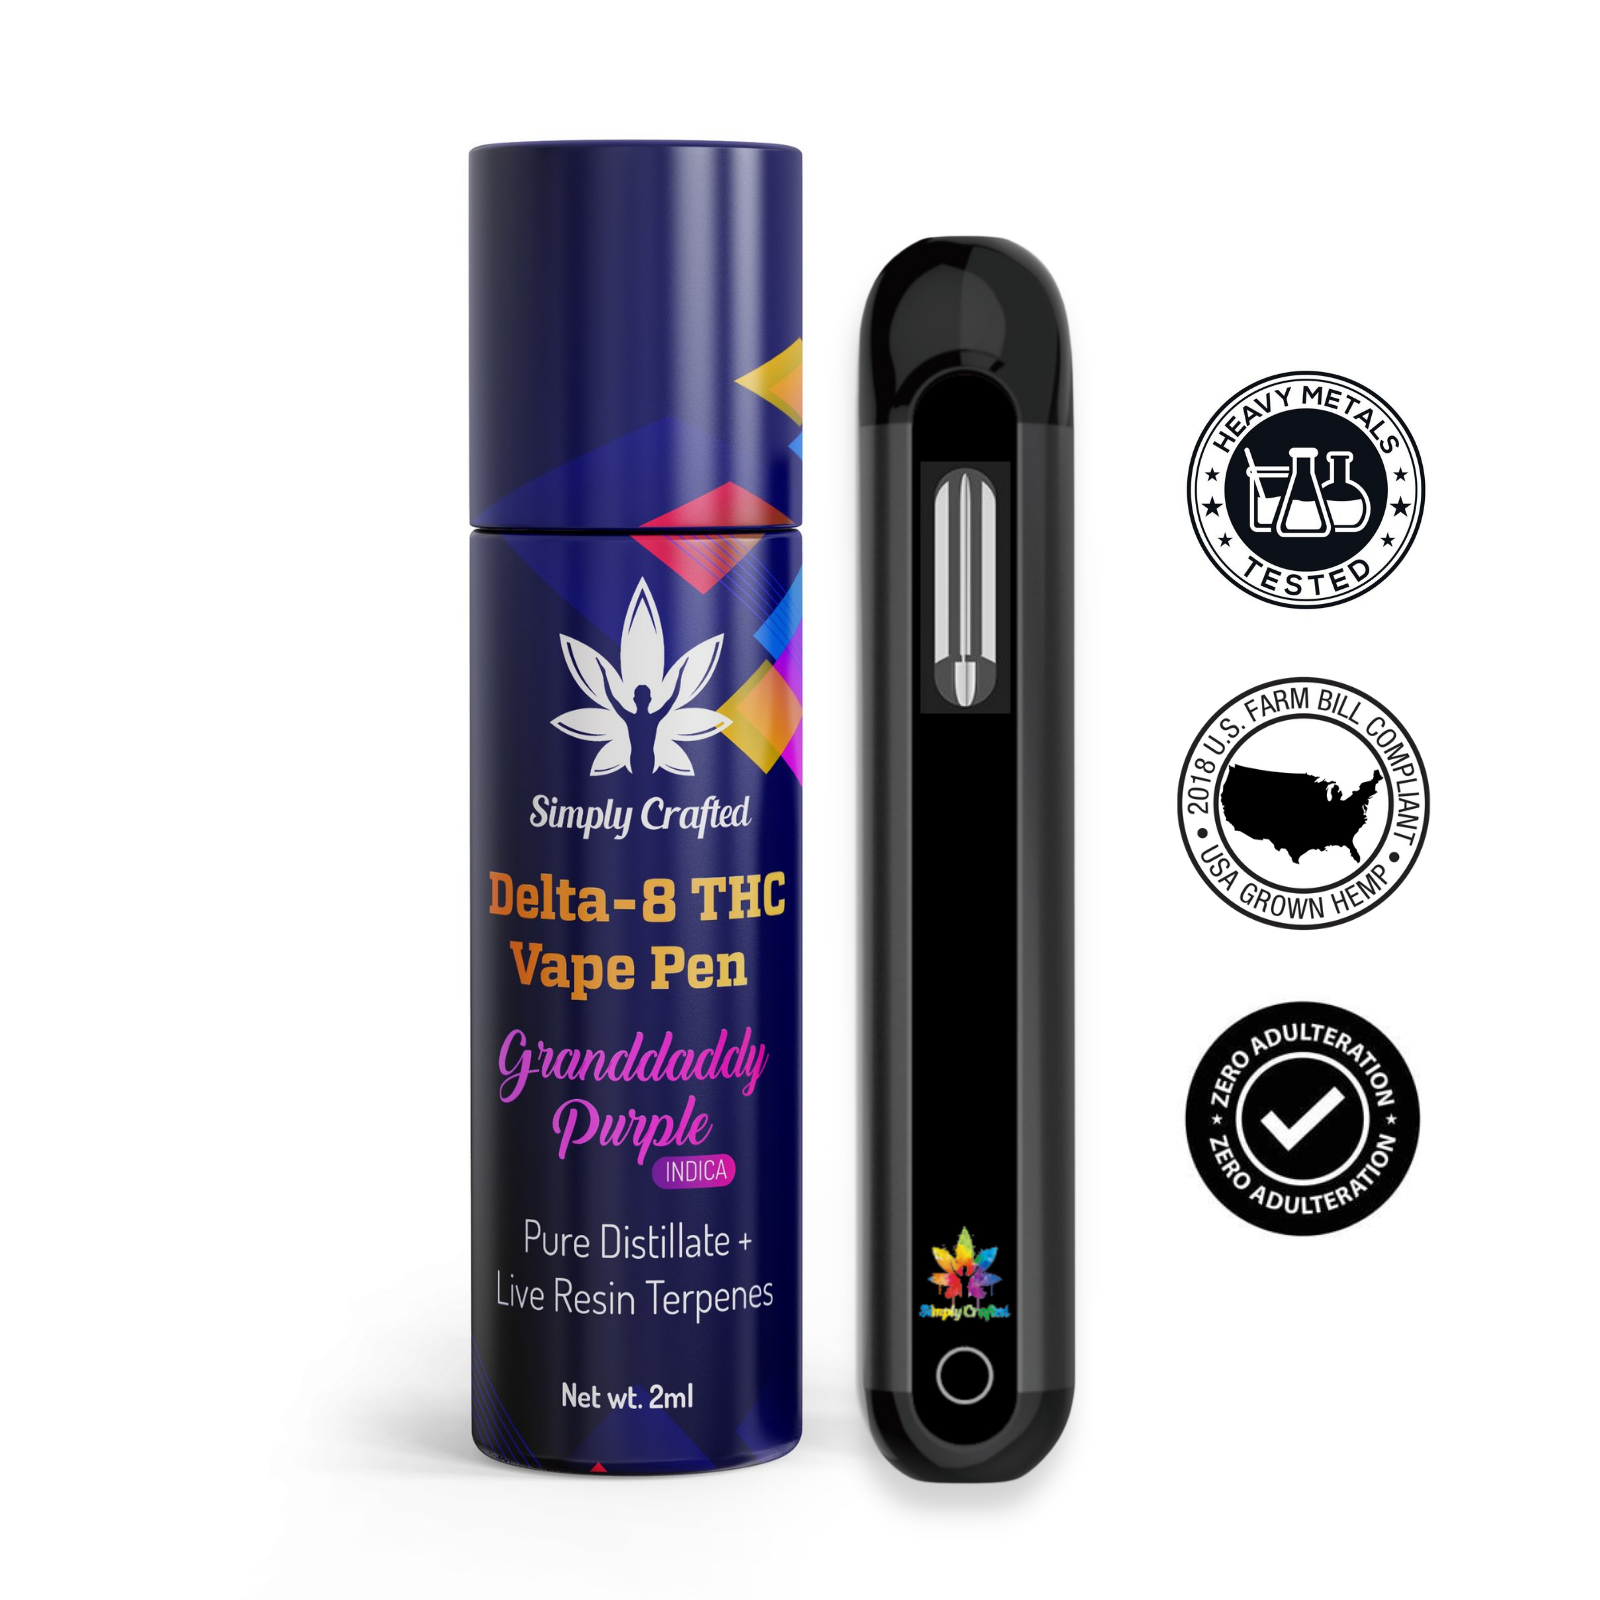 Simply Crafted Free Shipping Save 25 With Code Leafly 2ml Delta 8 Thc Vape Pen 8632